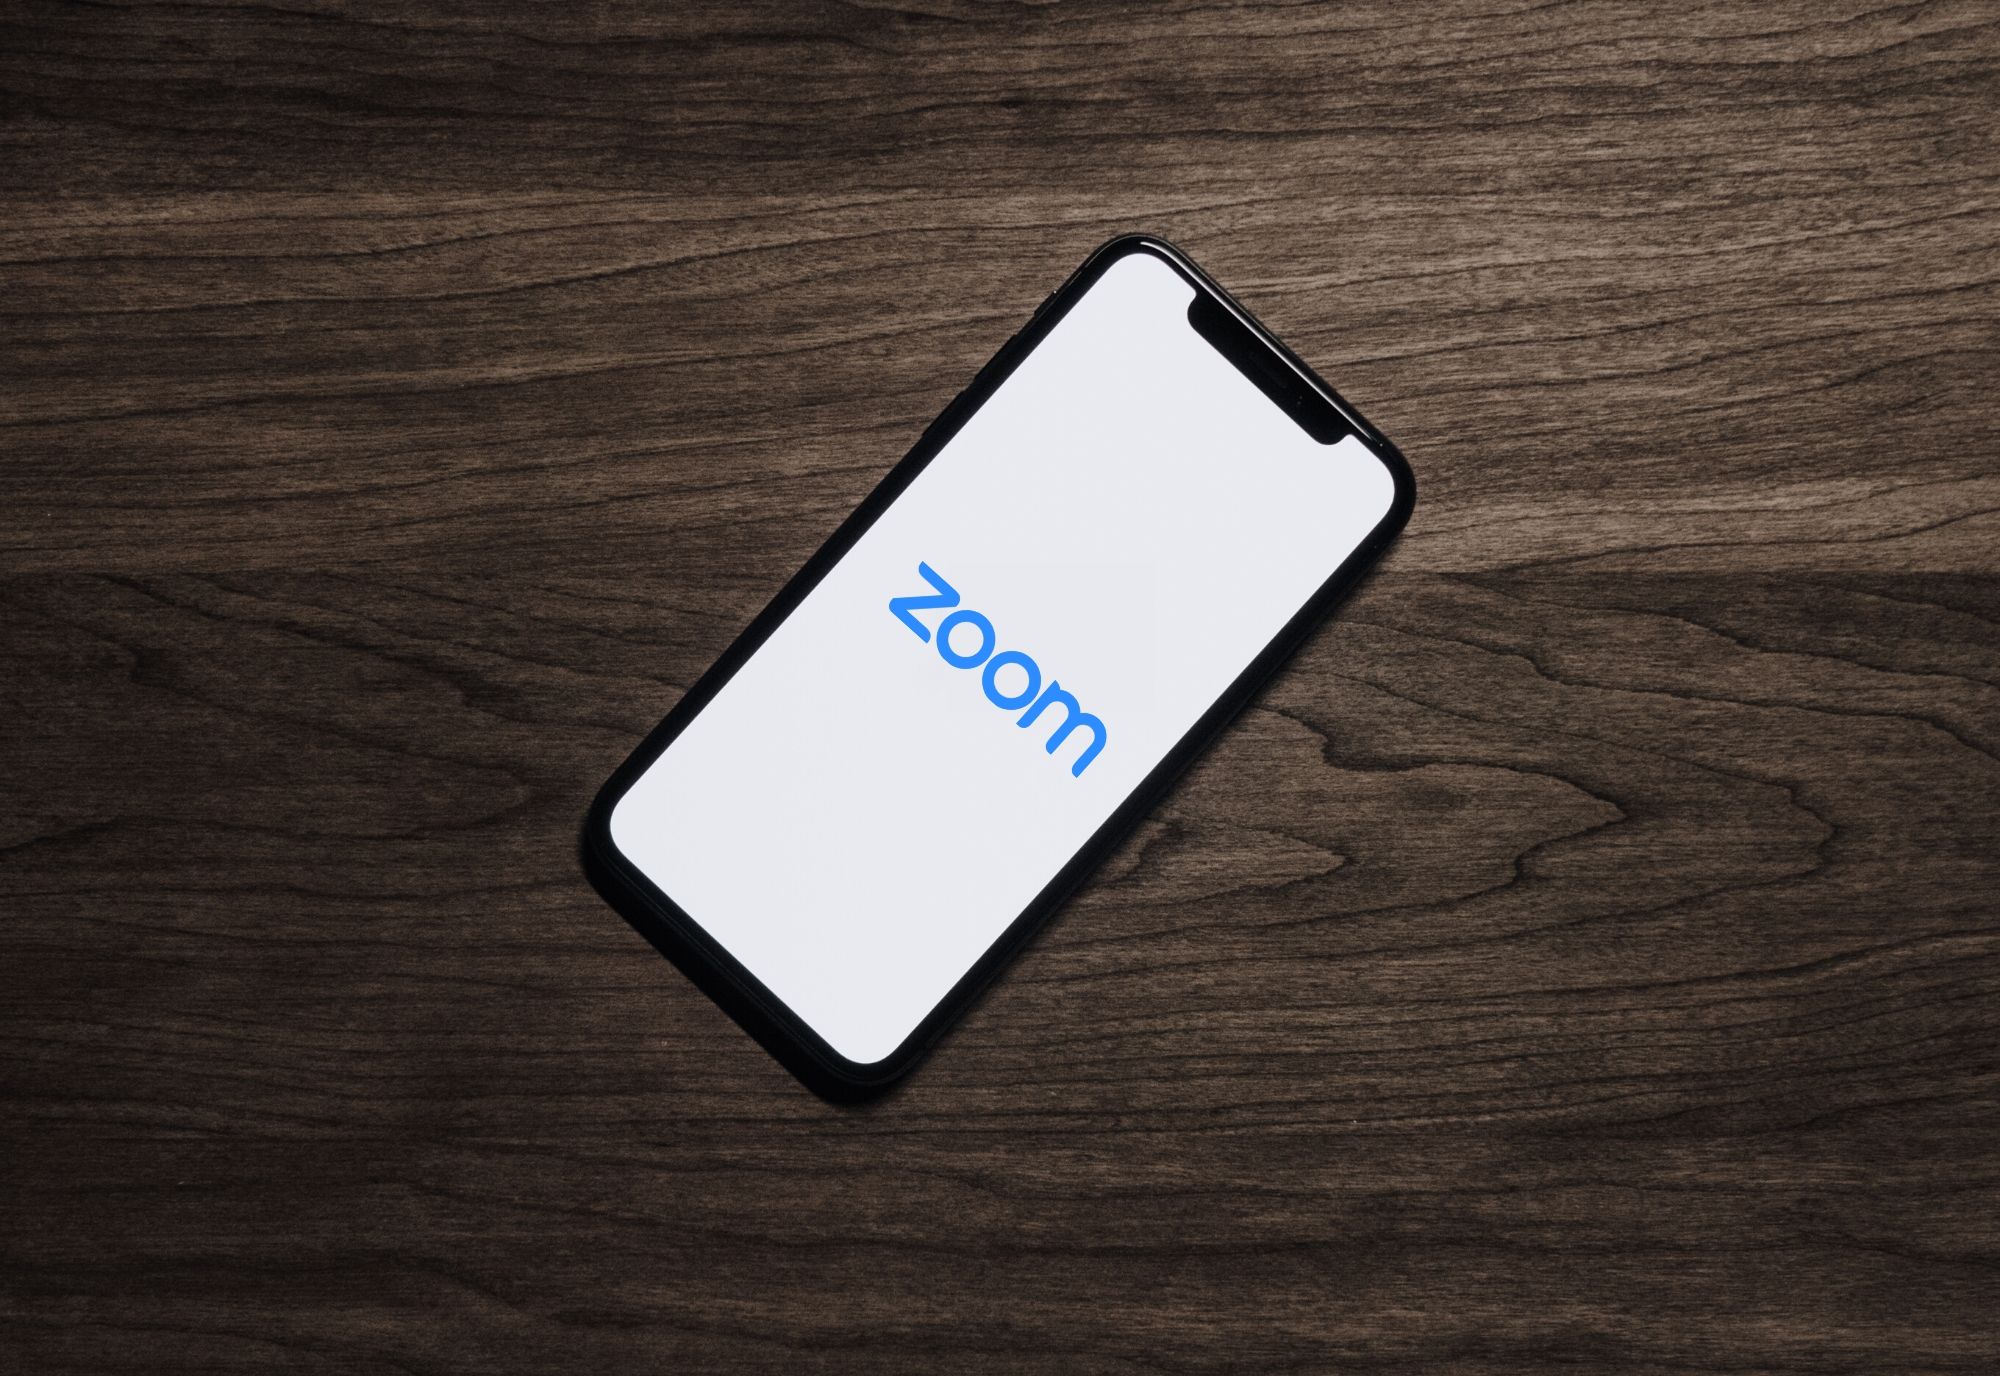 Zoom iOS app shared its users data with Facebook